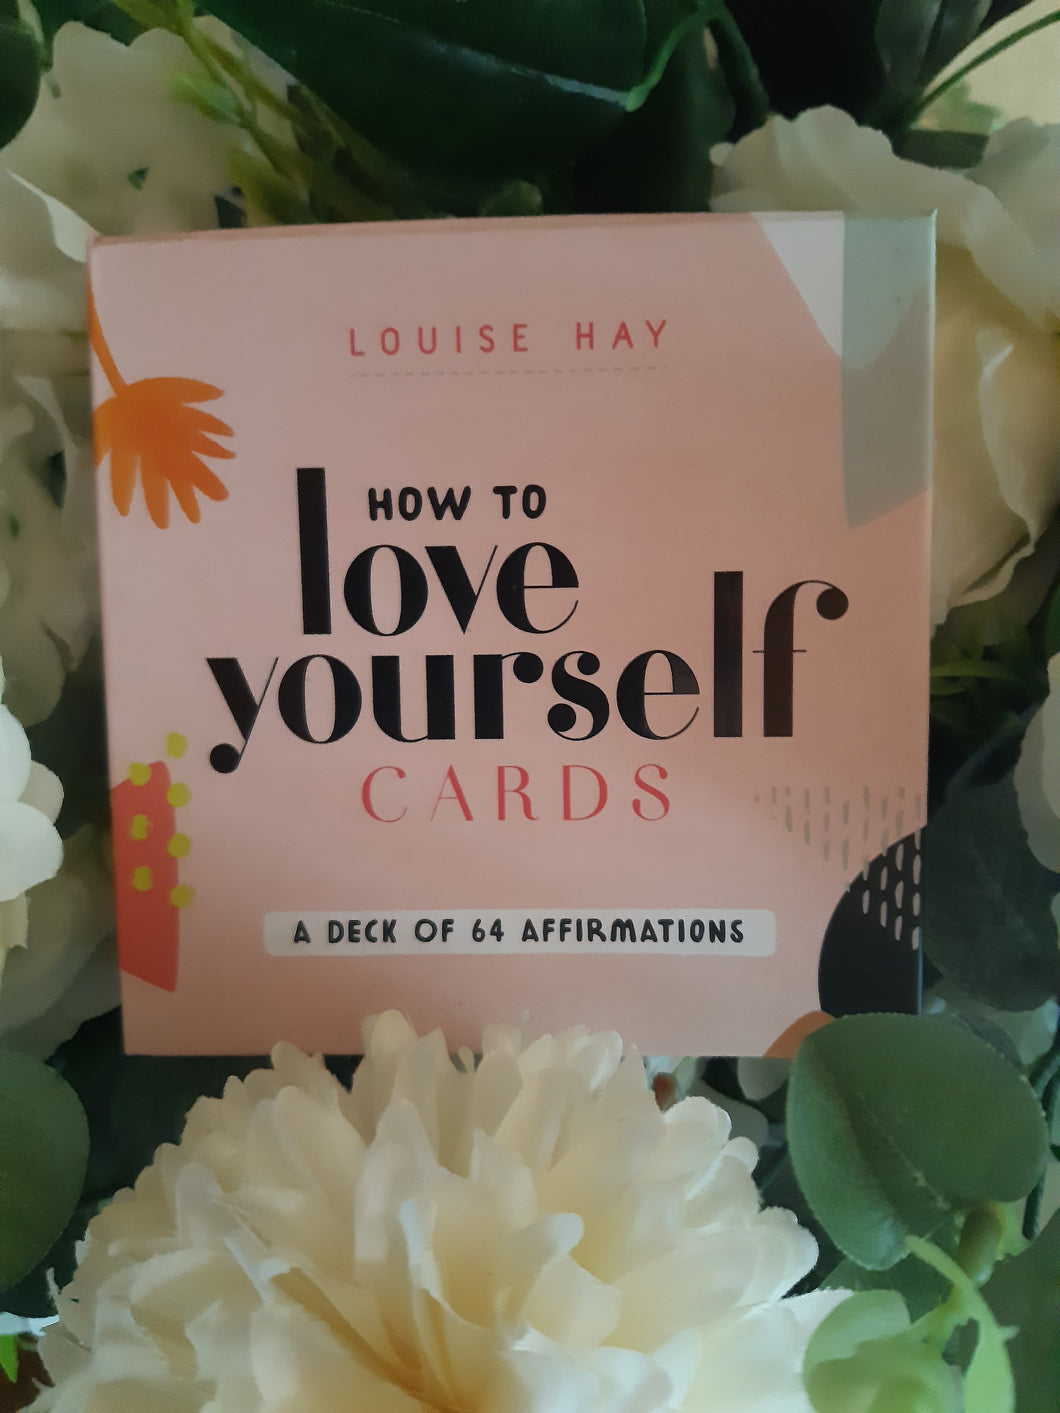 How to love yourself cards